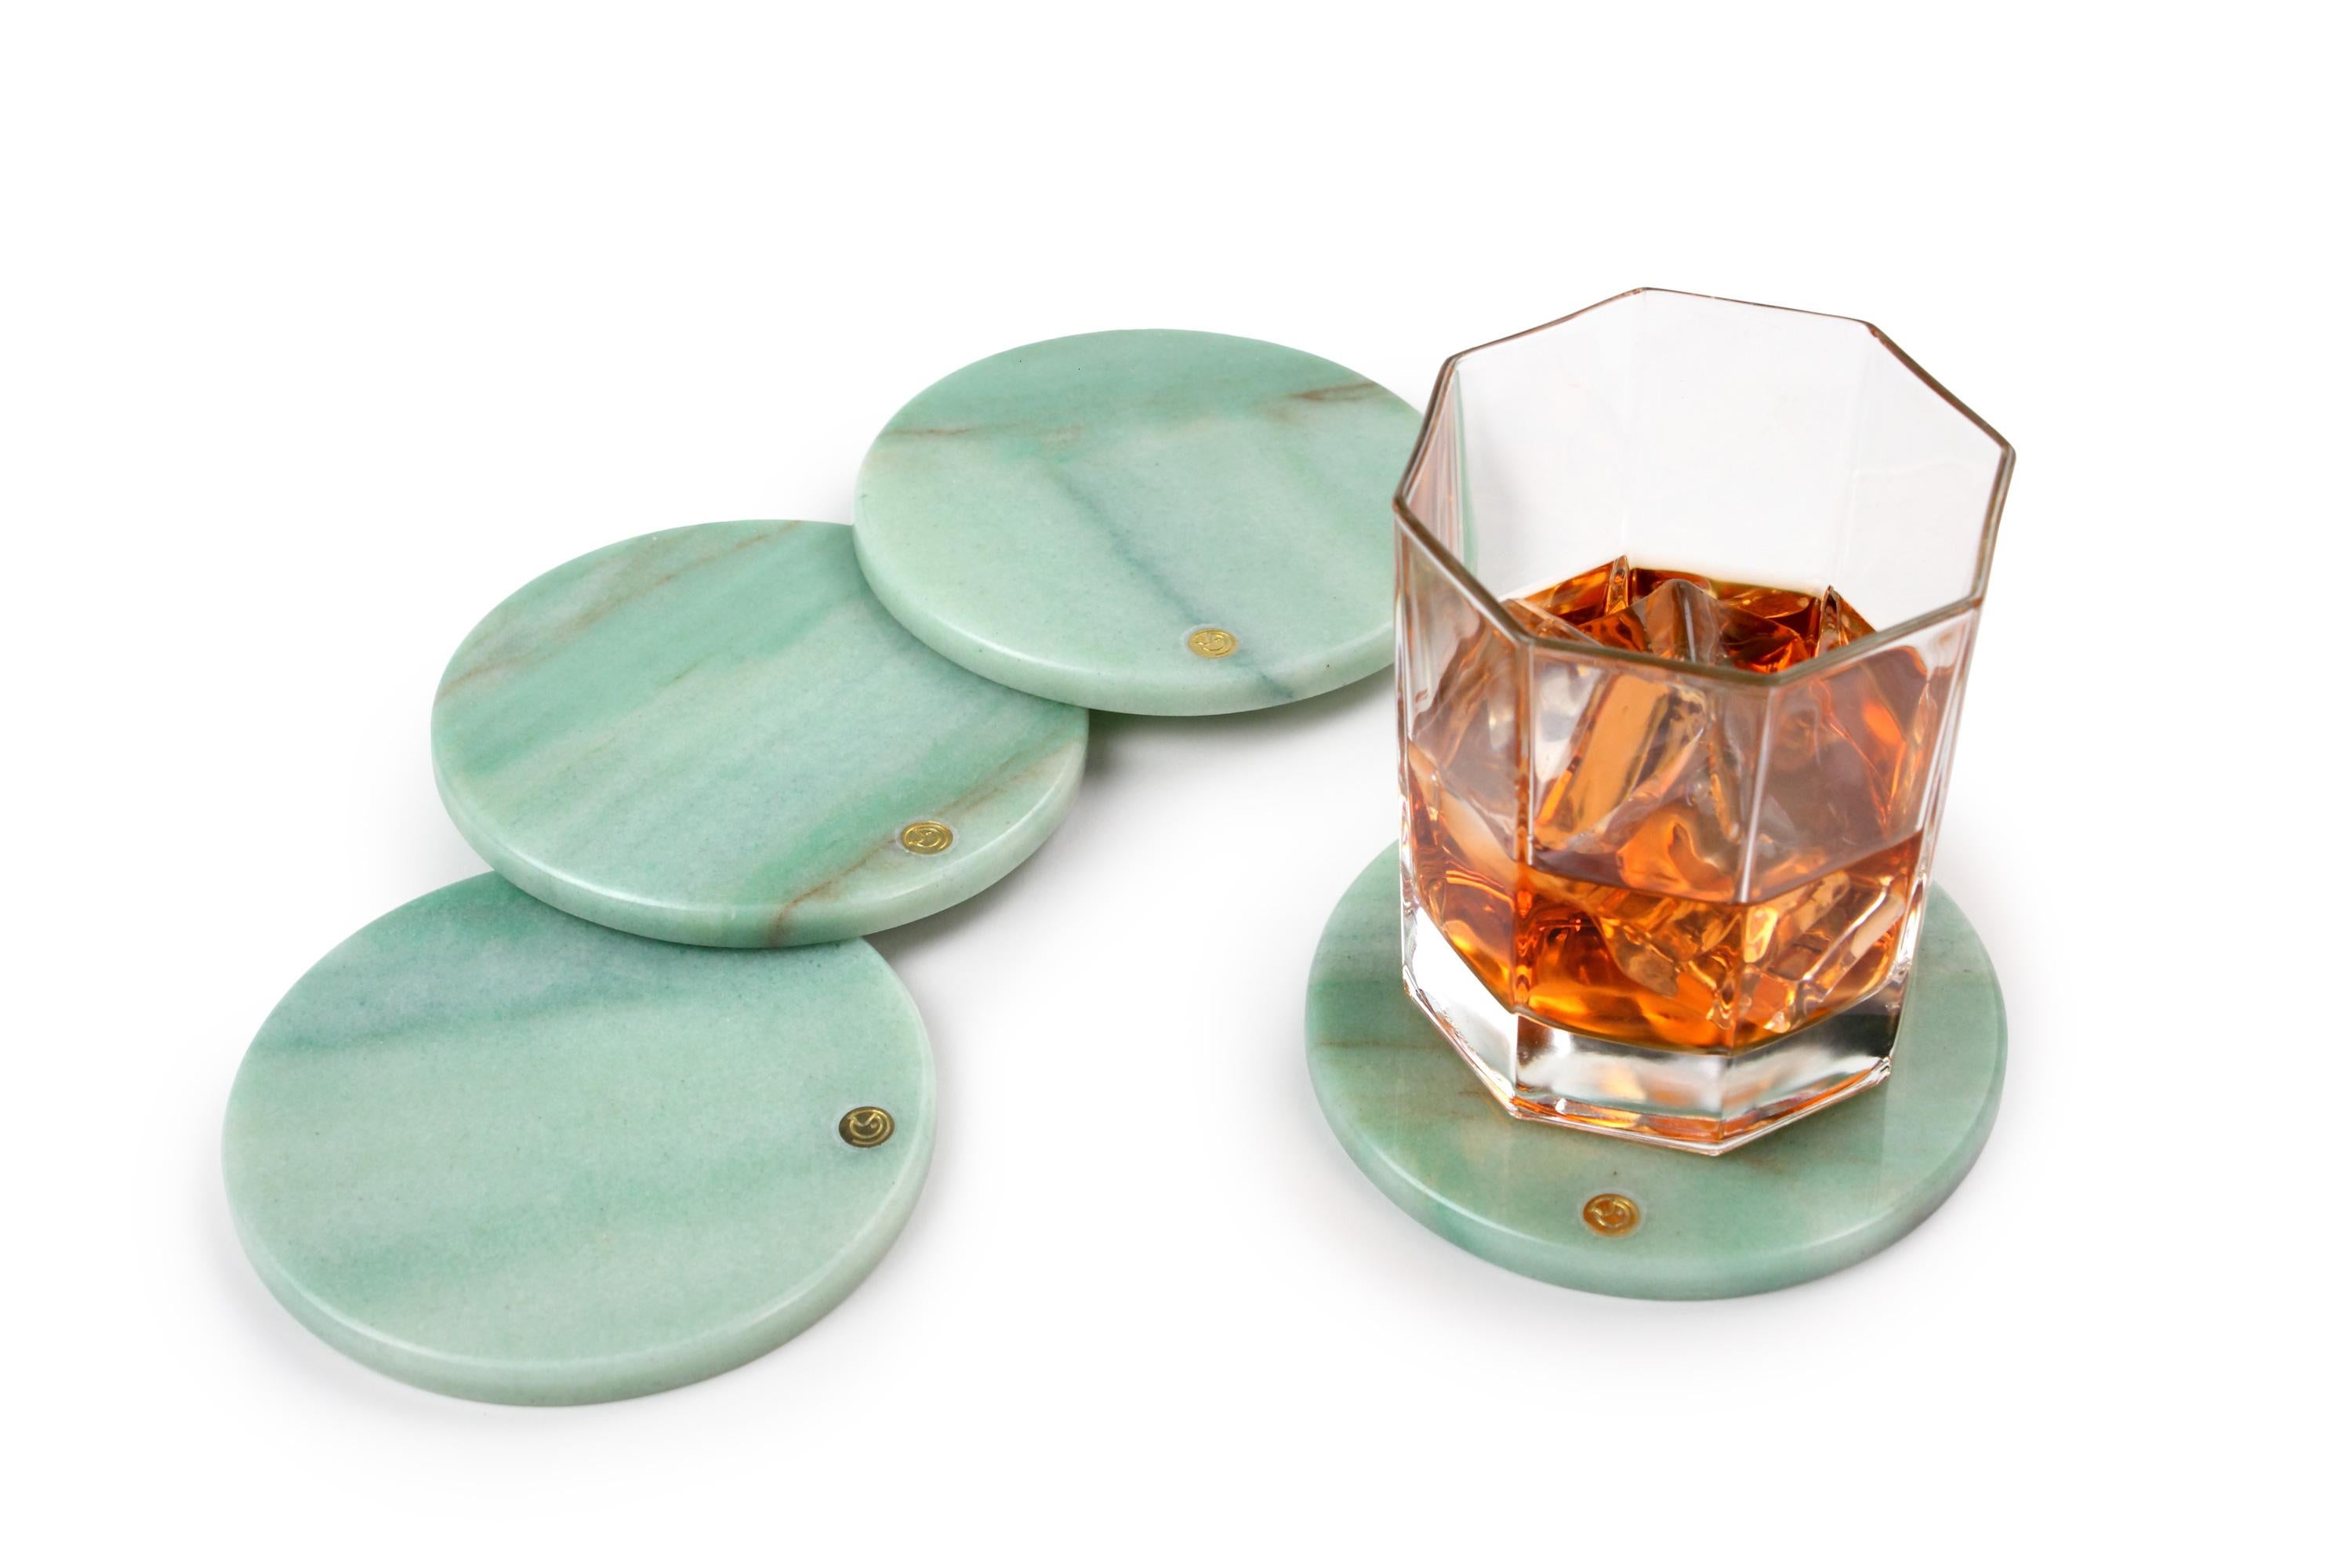 Set of 4 coasters in Green Quartzite.
Thanks to their shape and size they can be used as exclusive presentation plates for finger food.

Dimensions: D 10, H 0.8 cm
Also available: Square: L 10, W 10, H 0.8 cm
Available in different marbles, onyx and